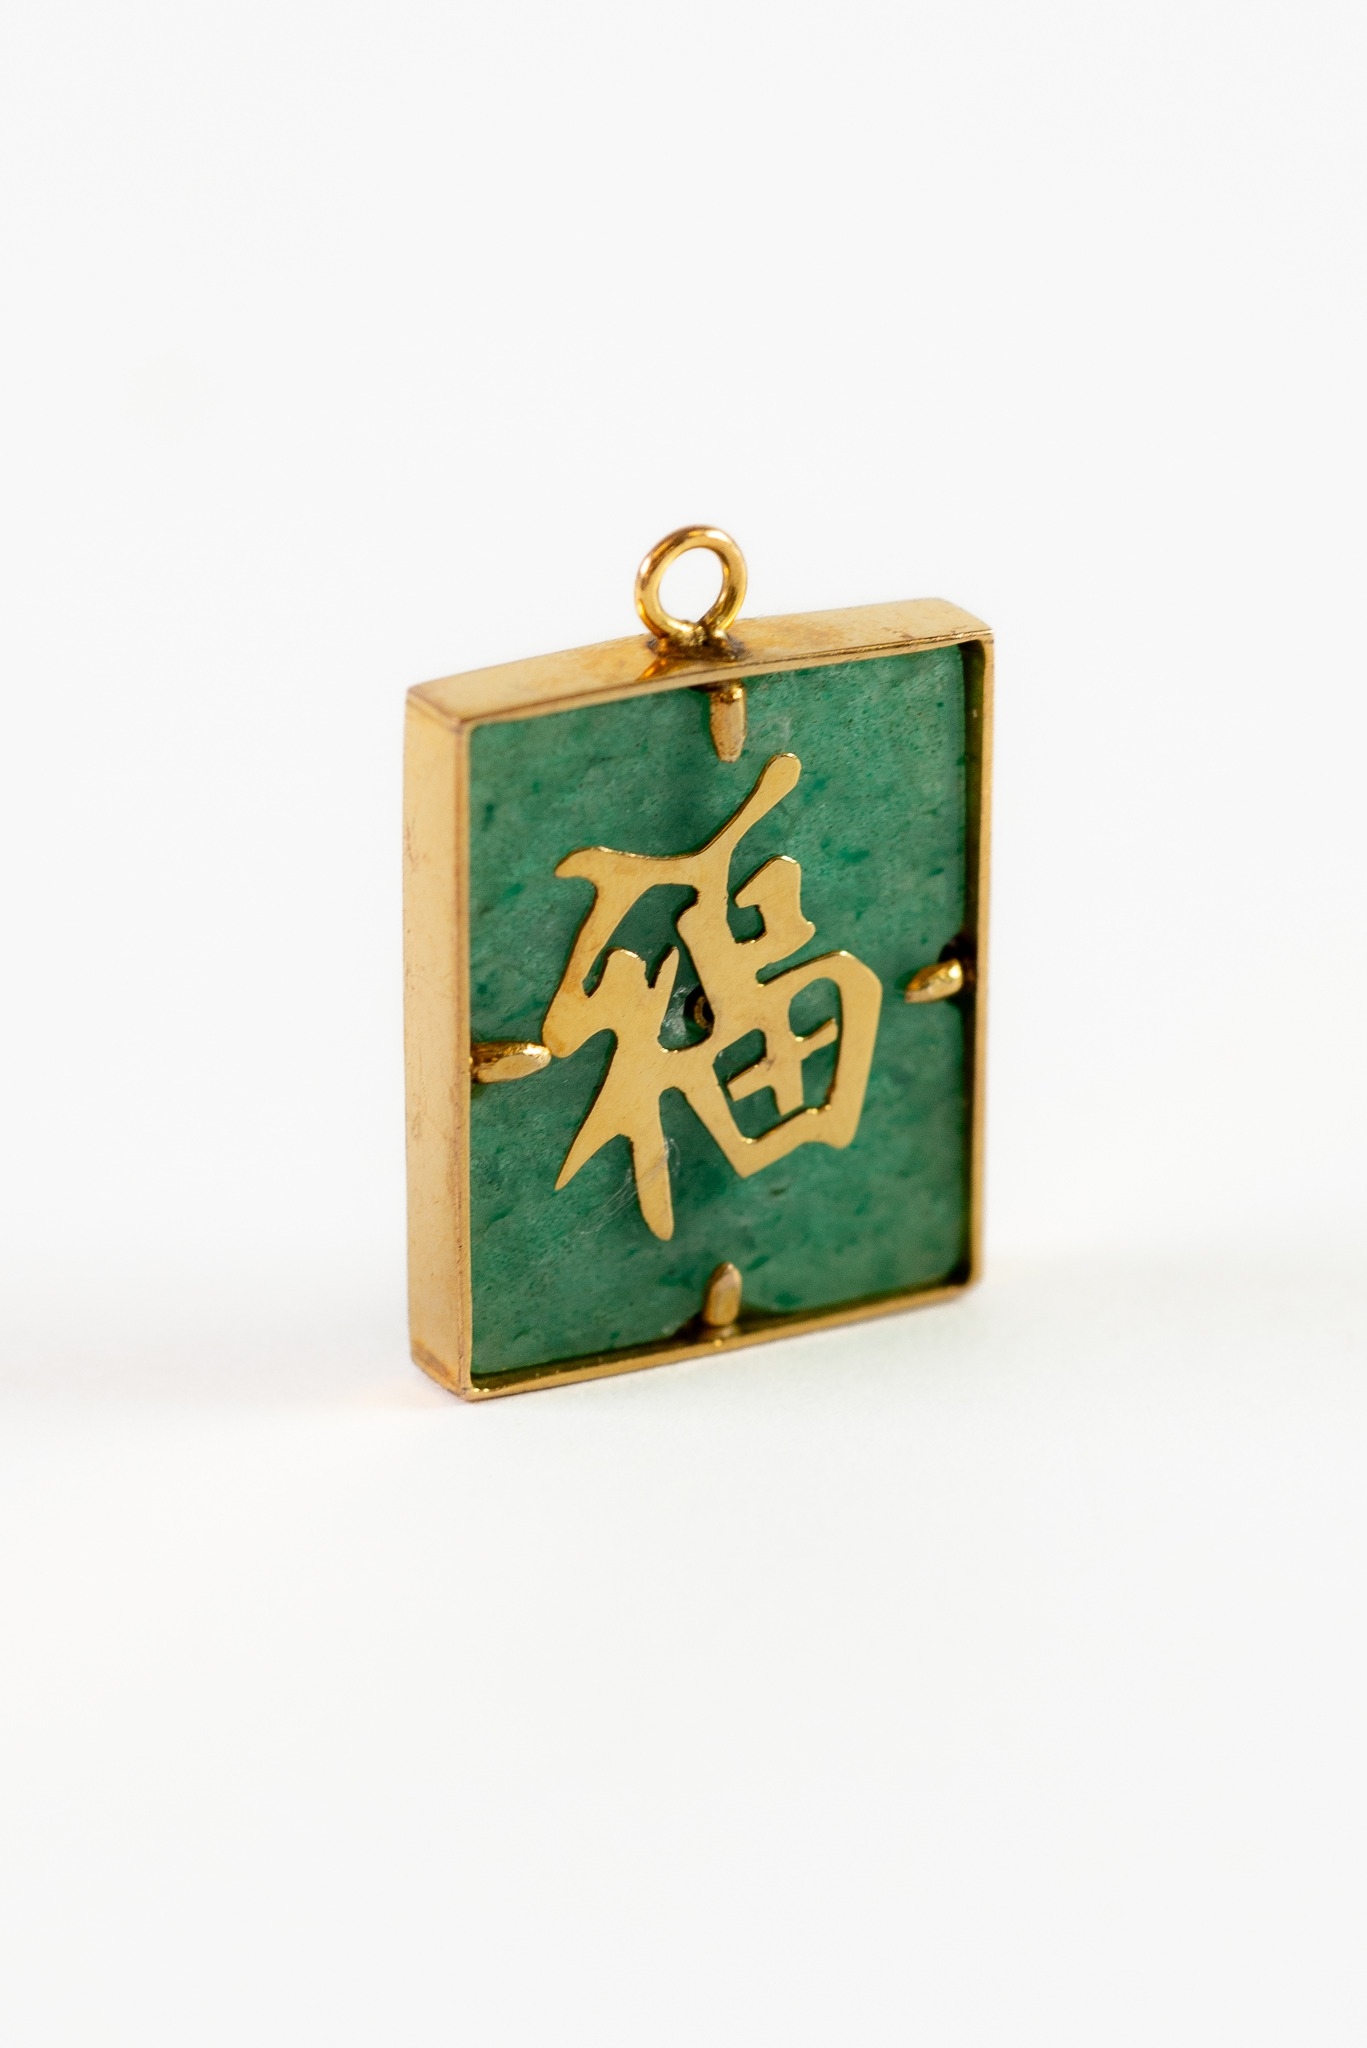 CHINESE 14k GOLD MOUNTED GREEN AVENTURINE QUARTZ RECTANGULAR PENDANT, on each side with a CHARACTER